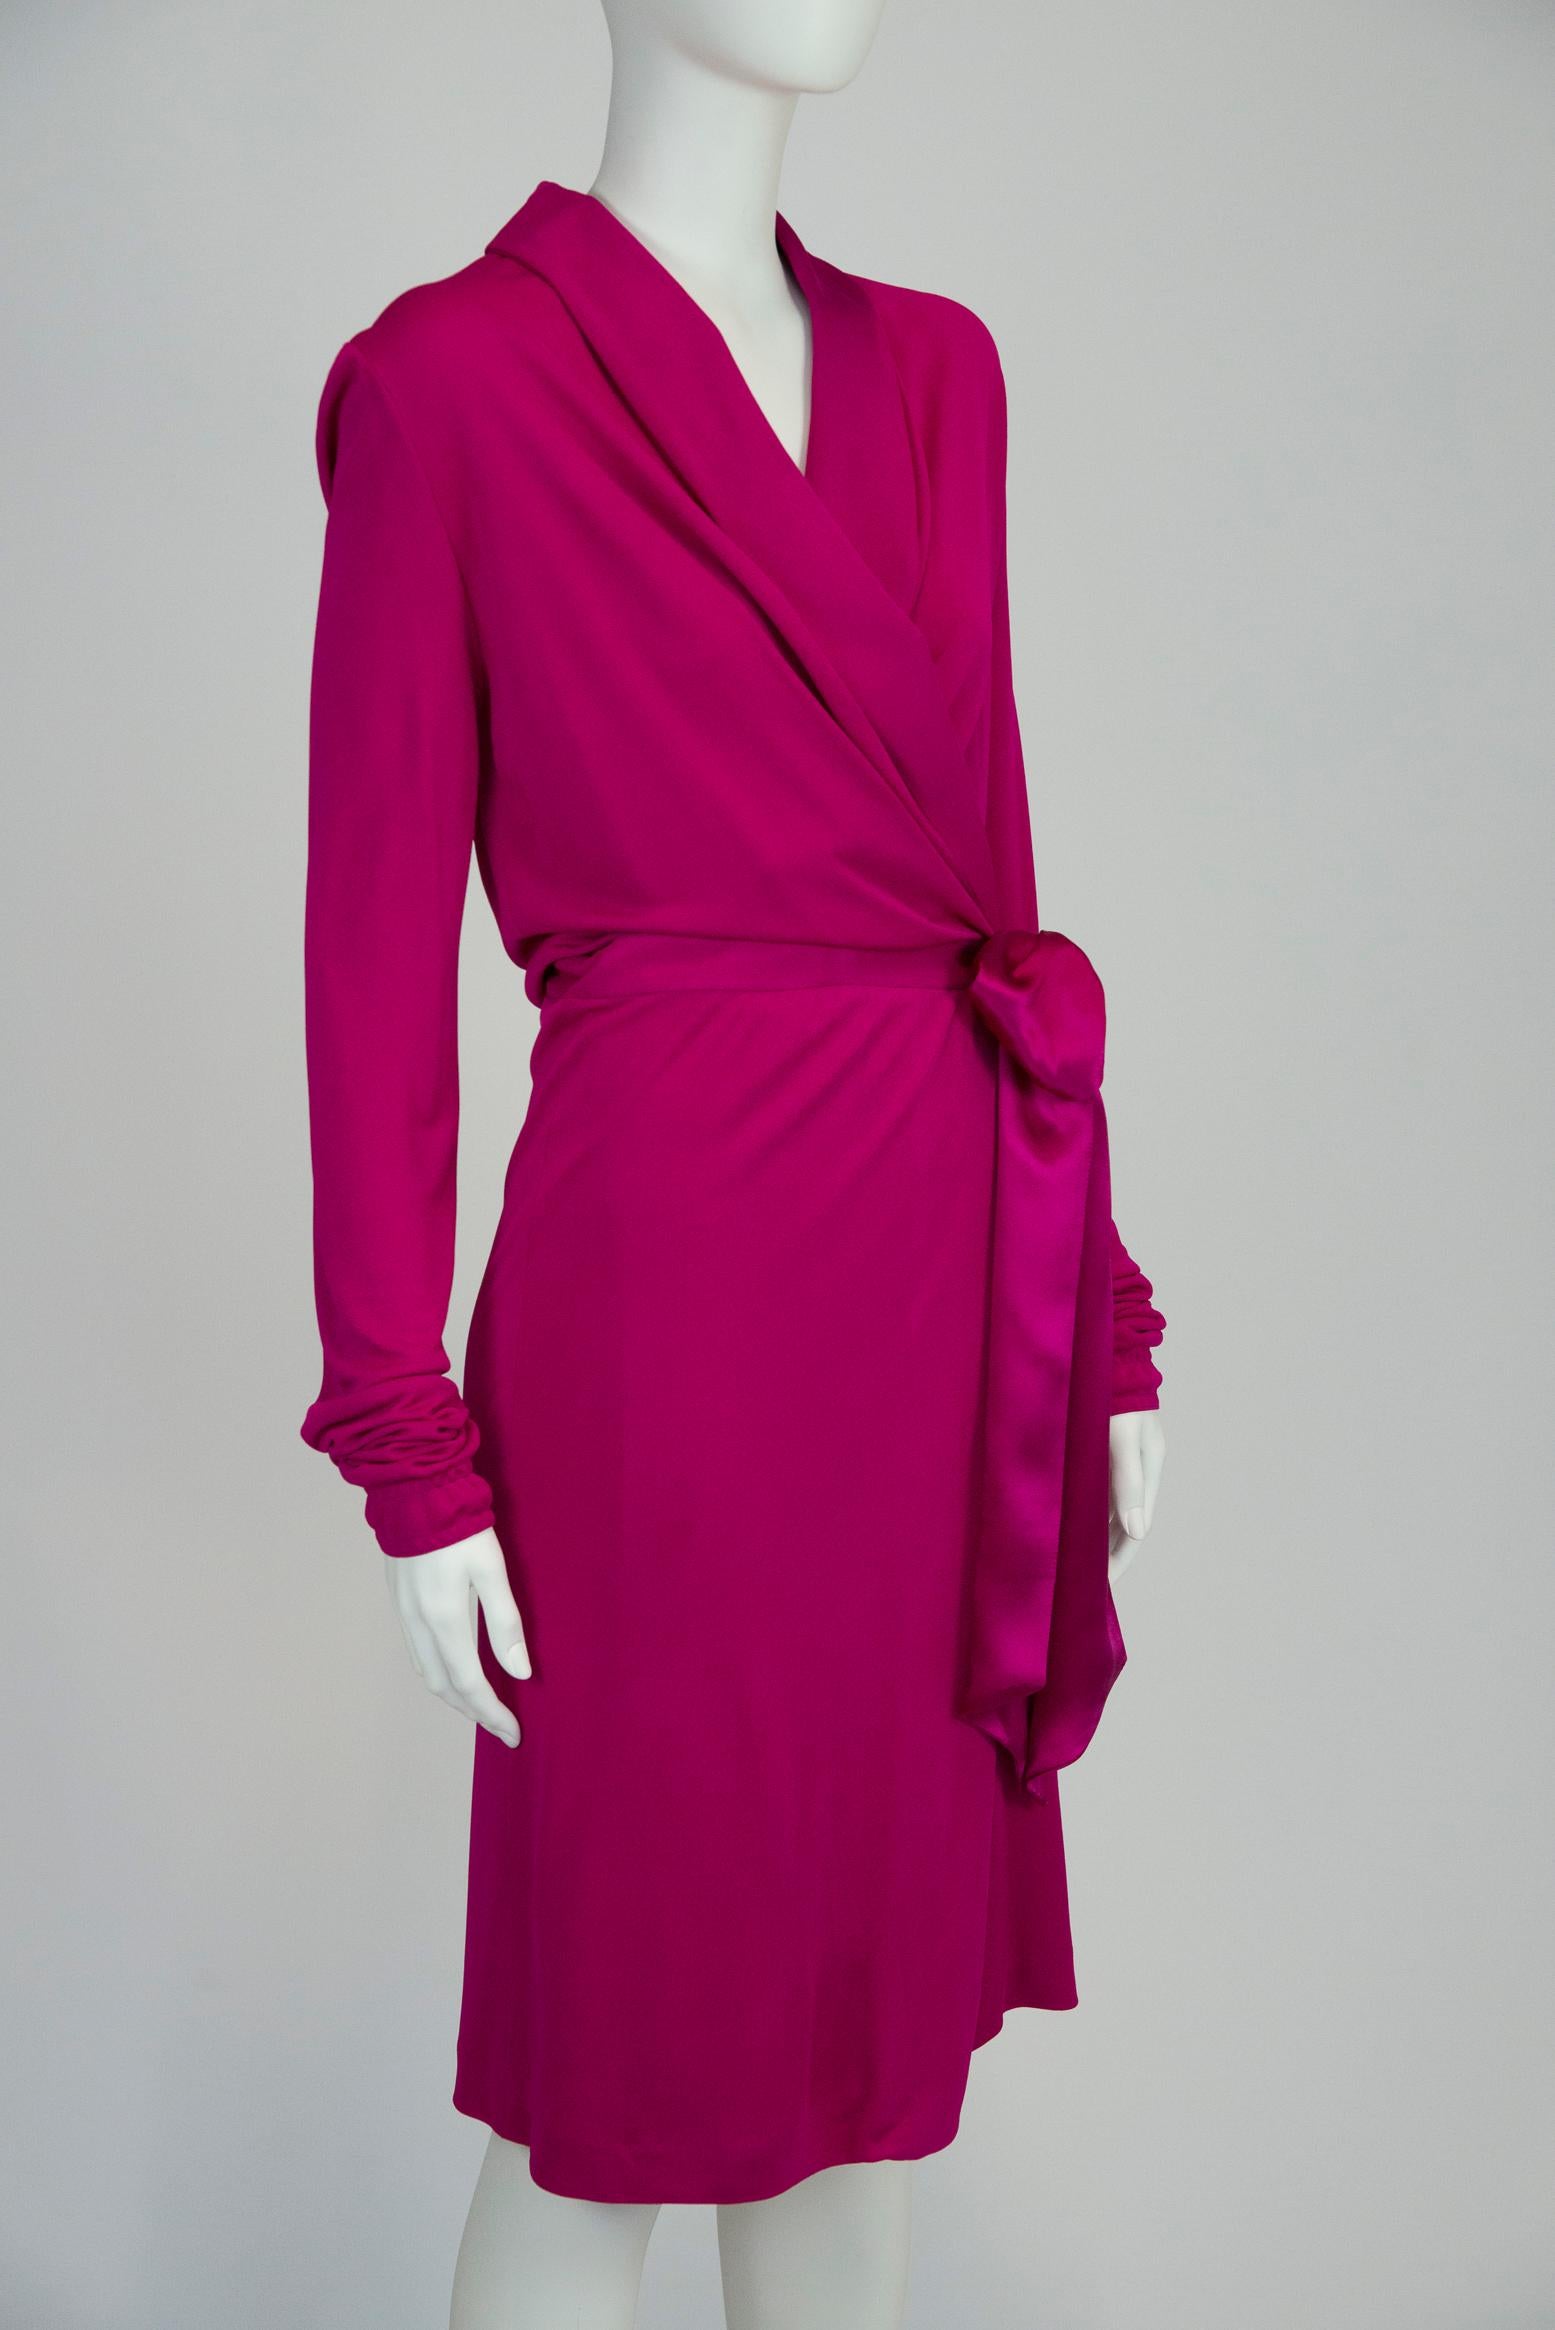 Yves Saint Laurent By Tom Ford Wrap Dress For Sale 9